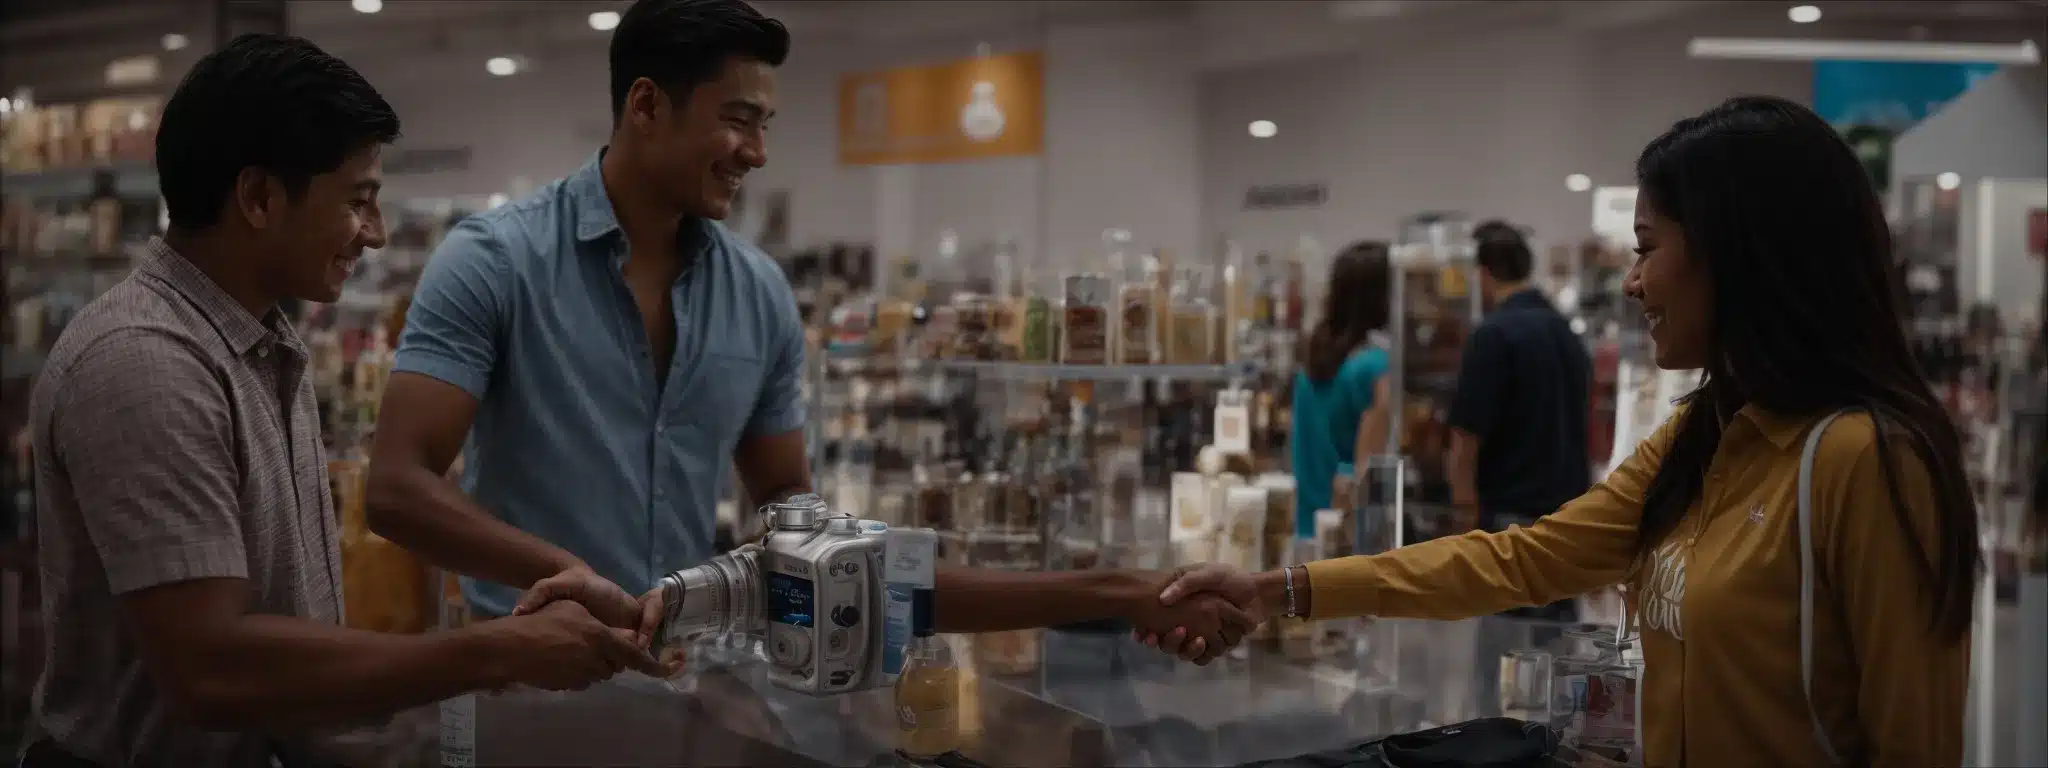 A Brand Representative Shakes Hands With A Smiling Customer In Front Of A Product Display.